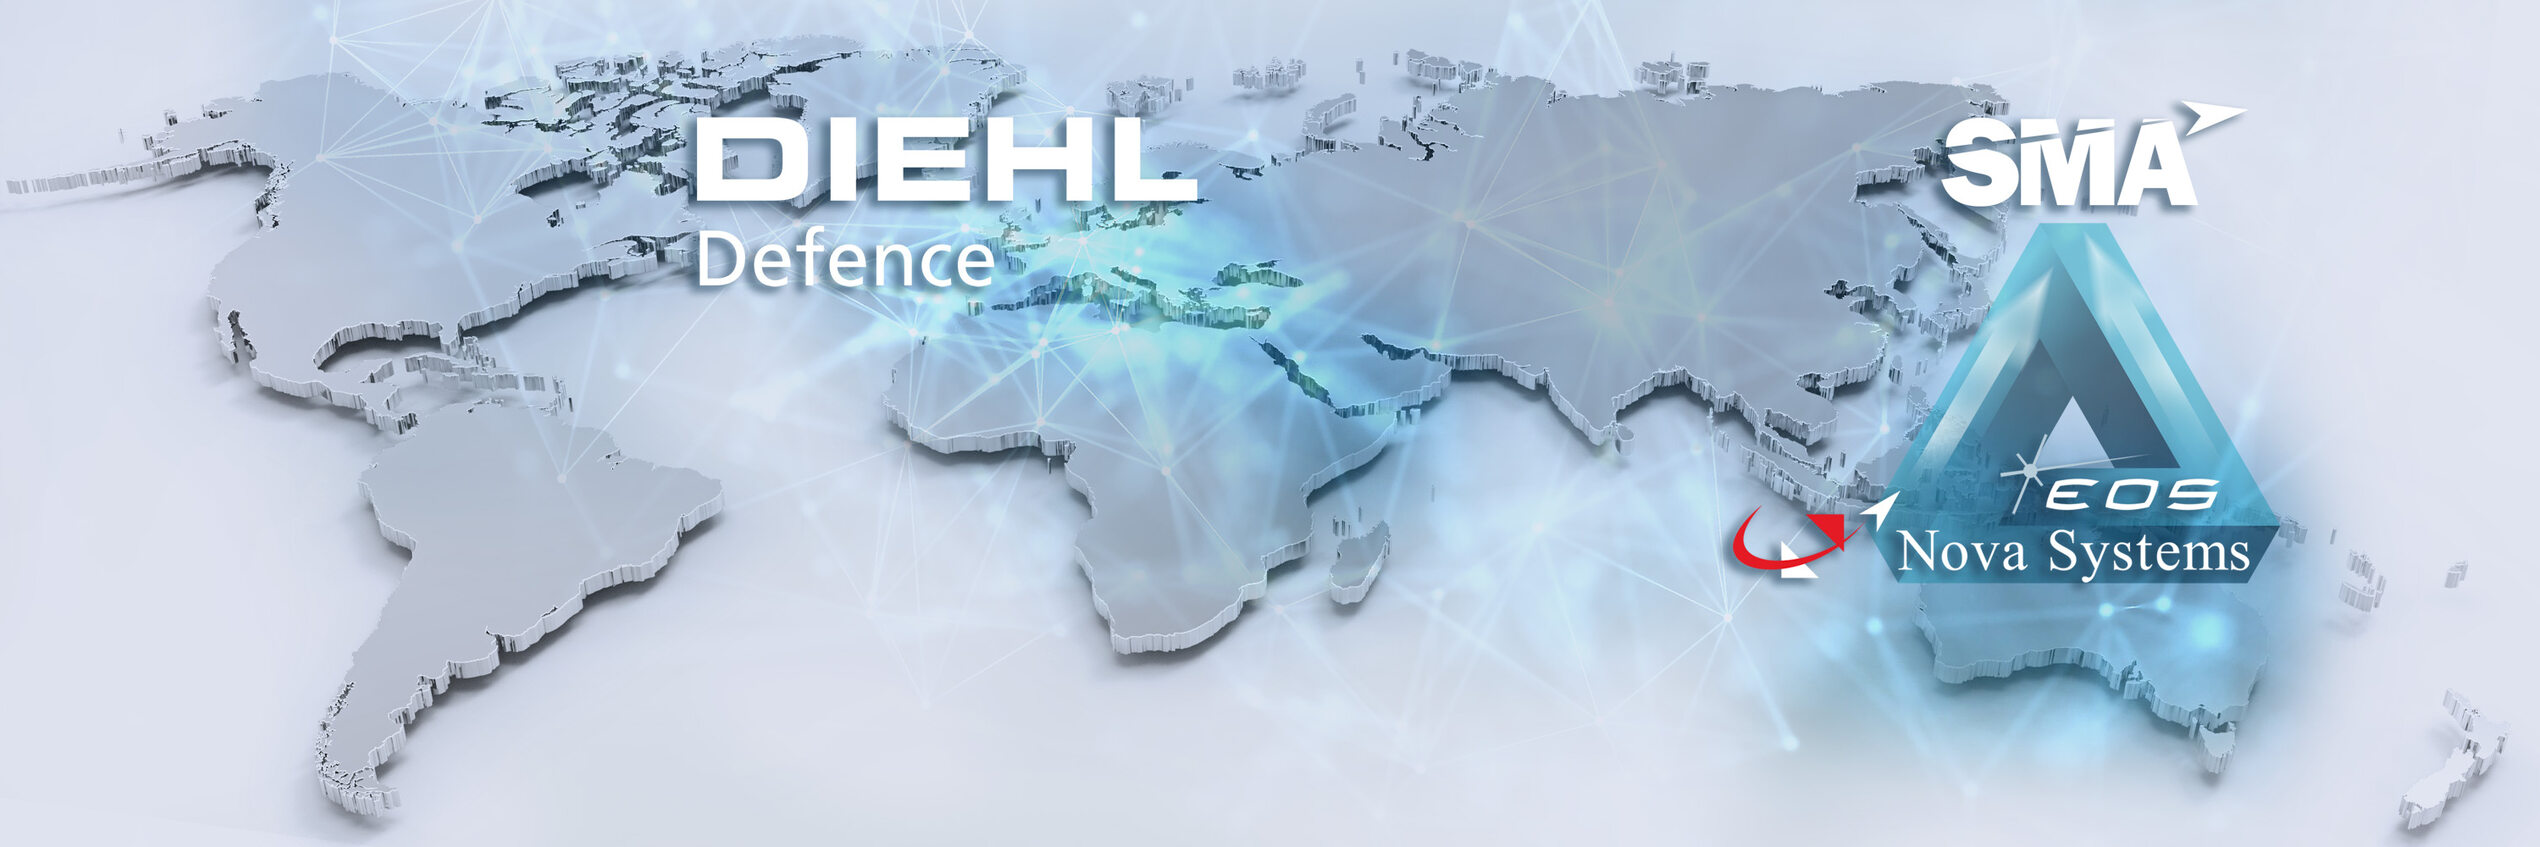 Sovereign Missile Alliance announces intention to collaborate with Diehl Defence